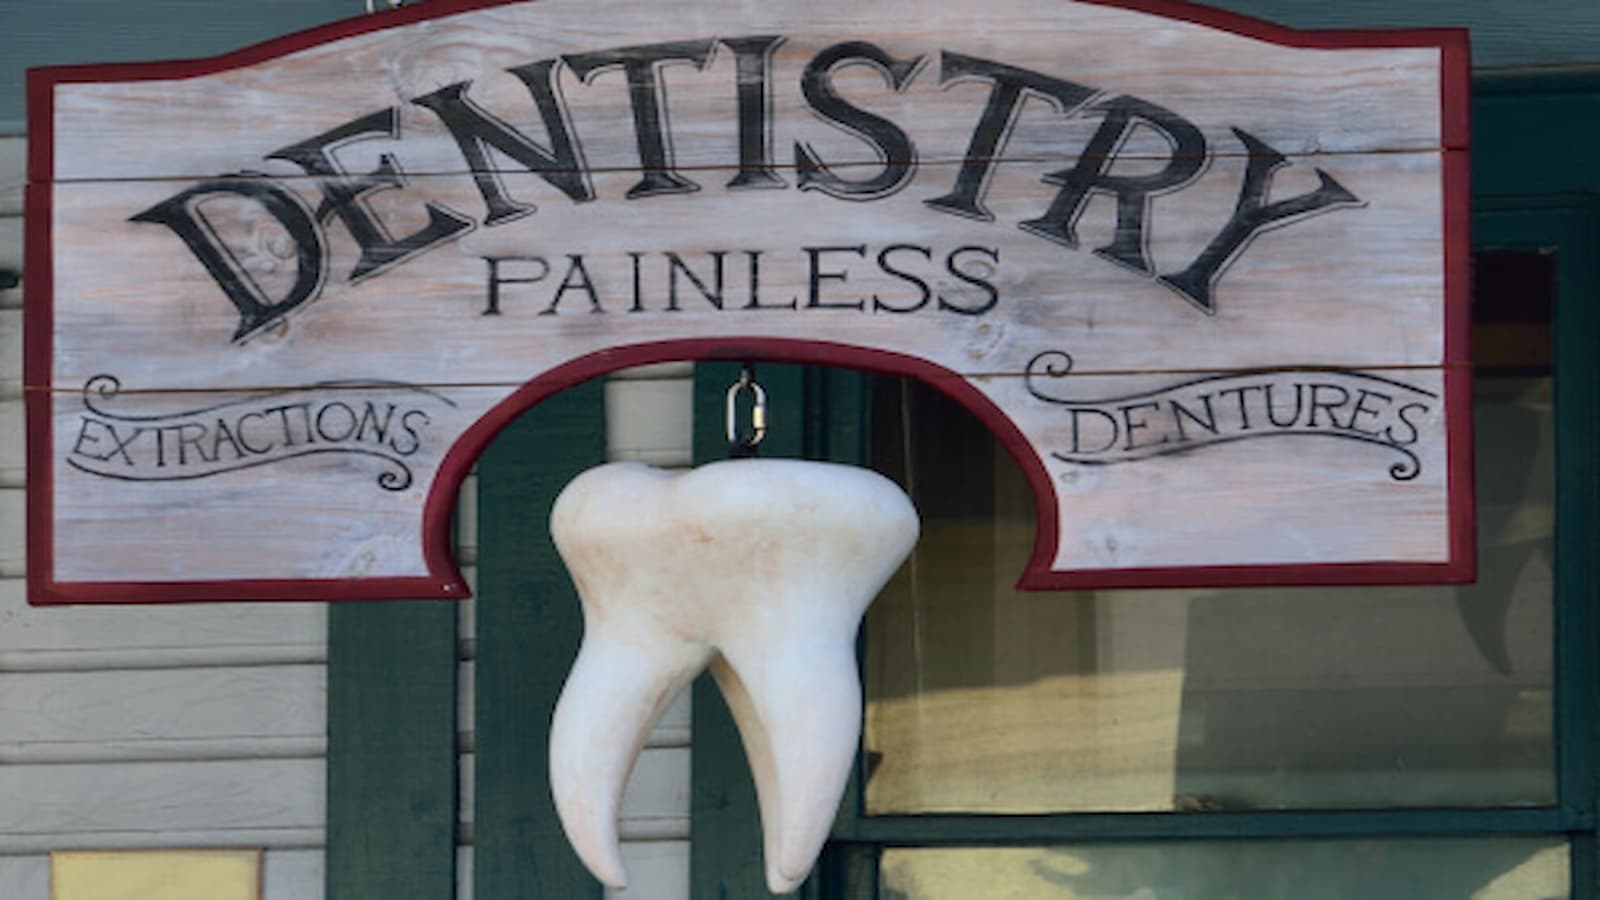 A Board that reads "DENTISTRY, PAINLESS"